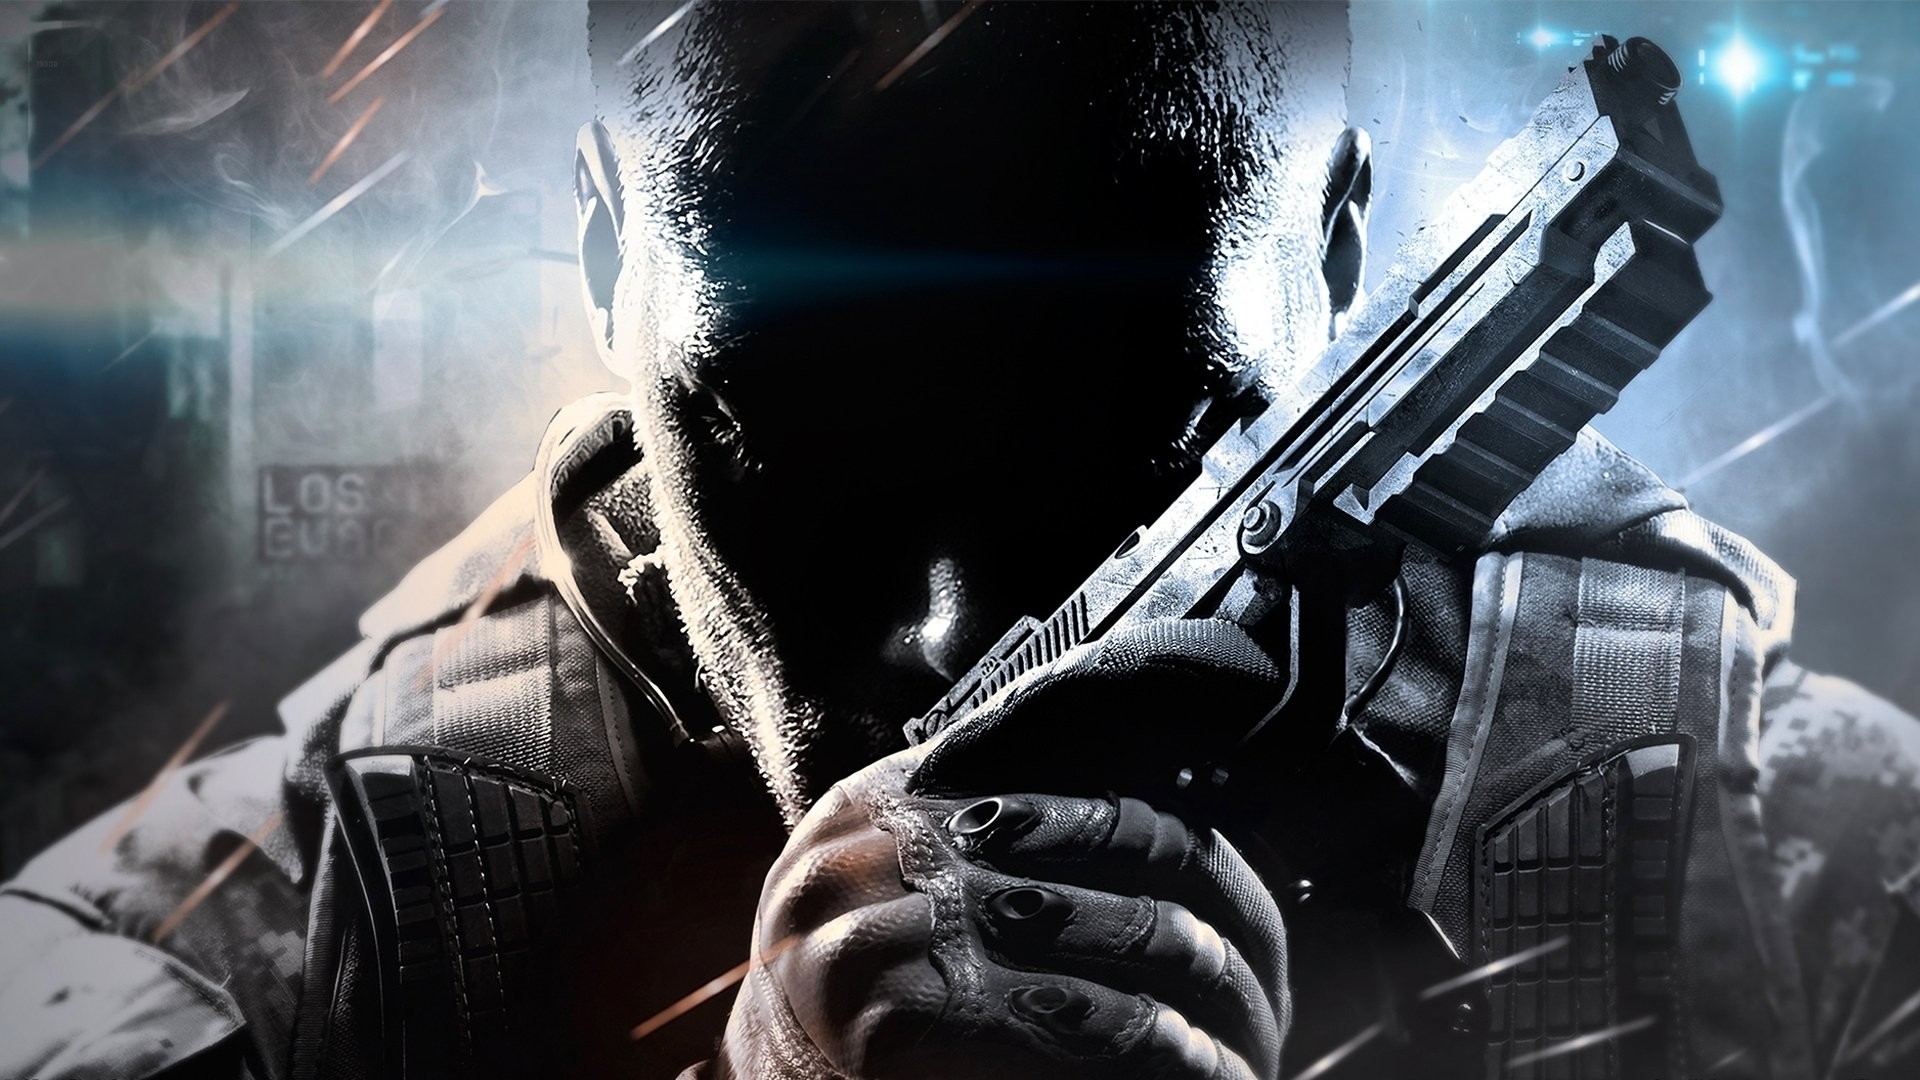 Call Of Duty Black Ops Wallpapers Images Backgrounds Photos and Pictures